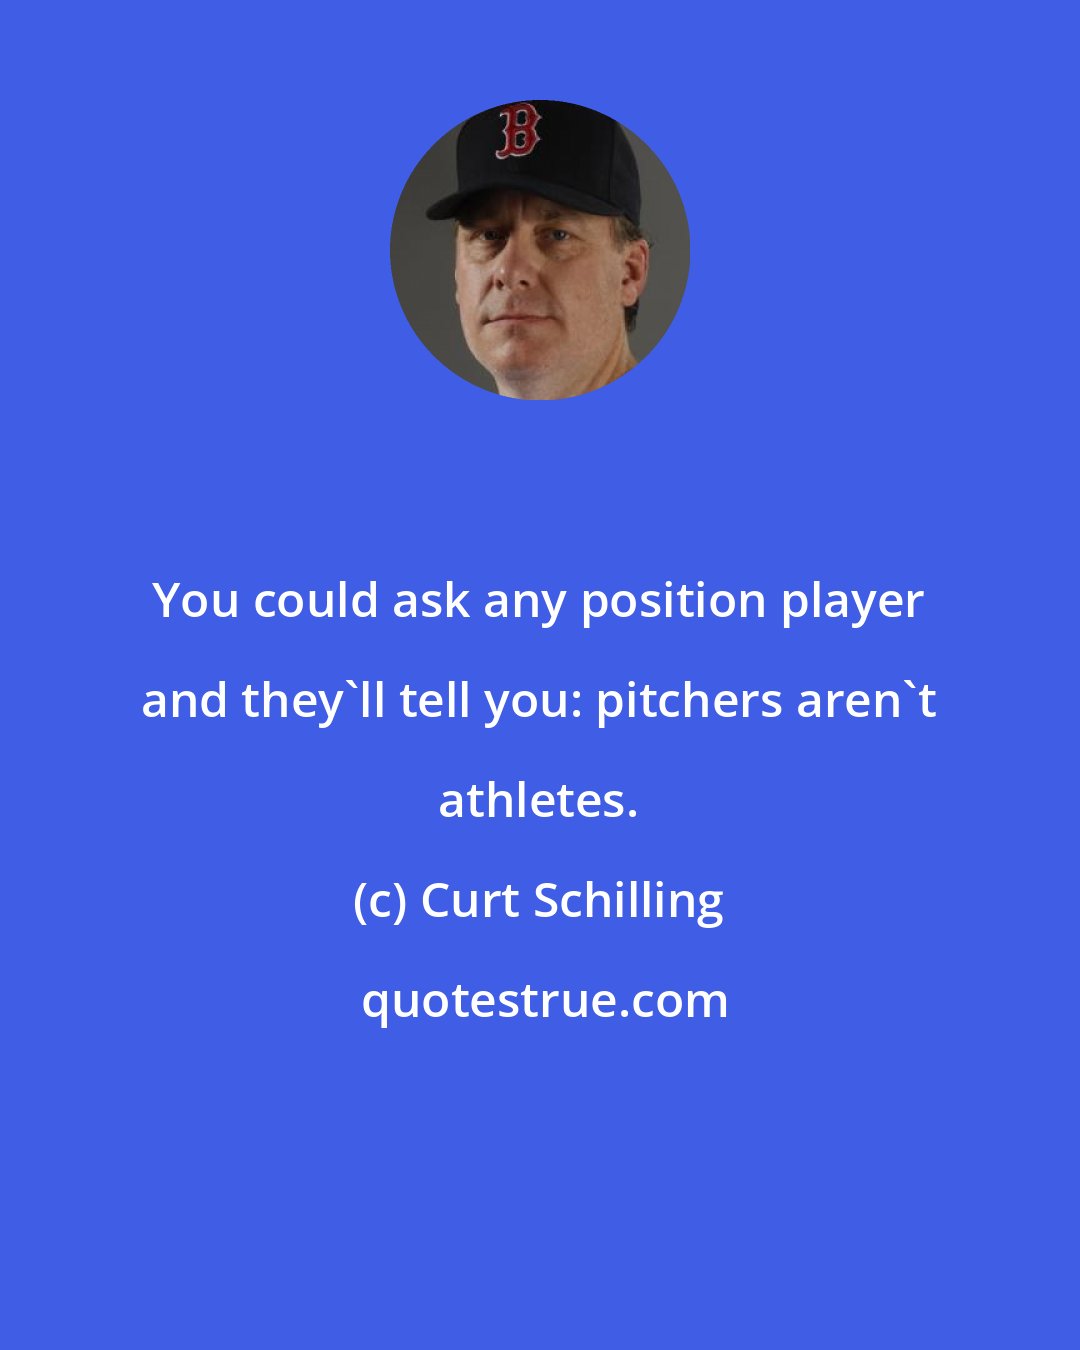 Curt Schilling: You could ask any position player and they'll tell you: pitchers aren't athletes.